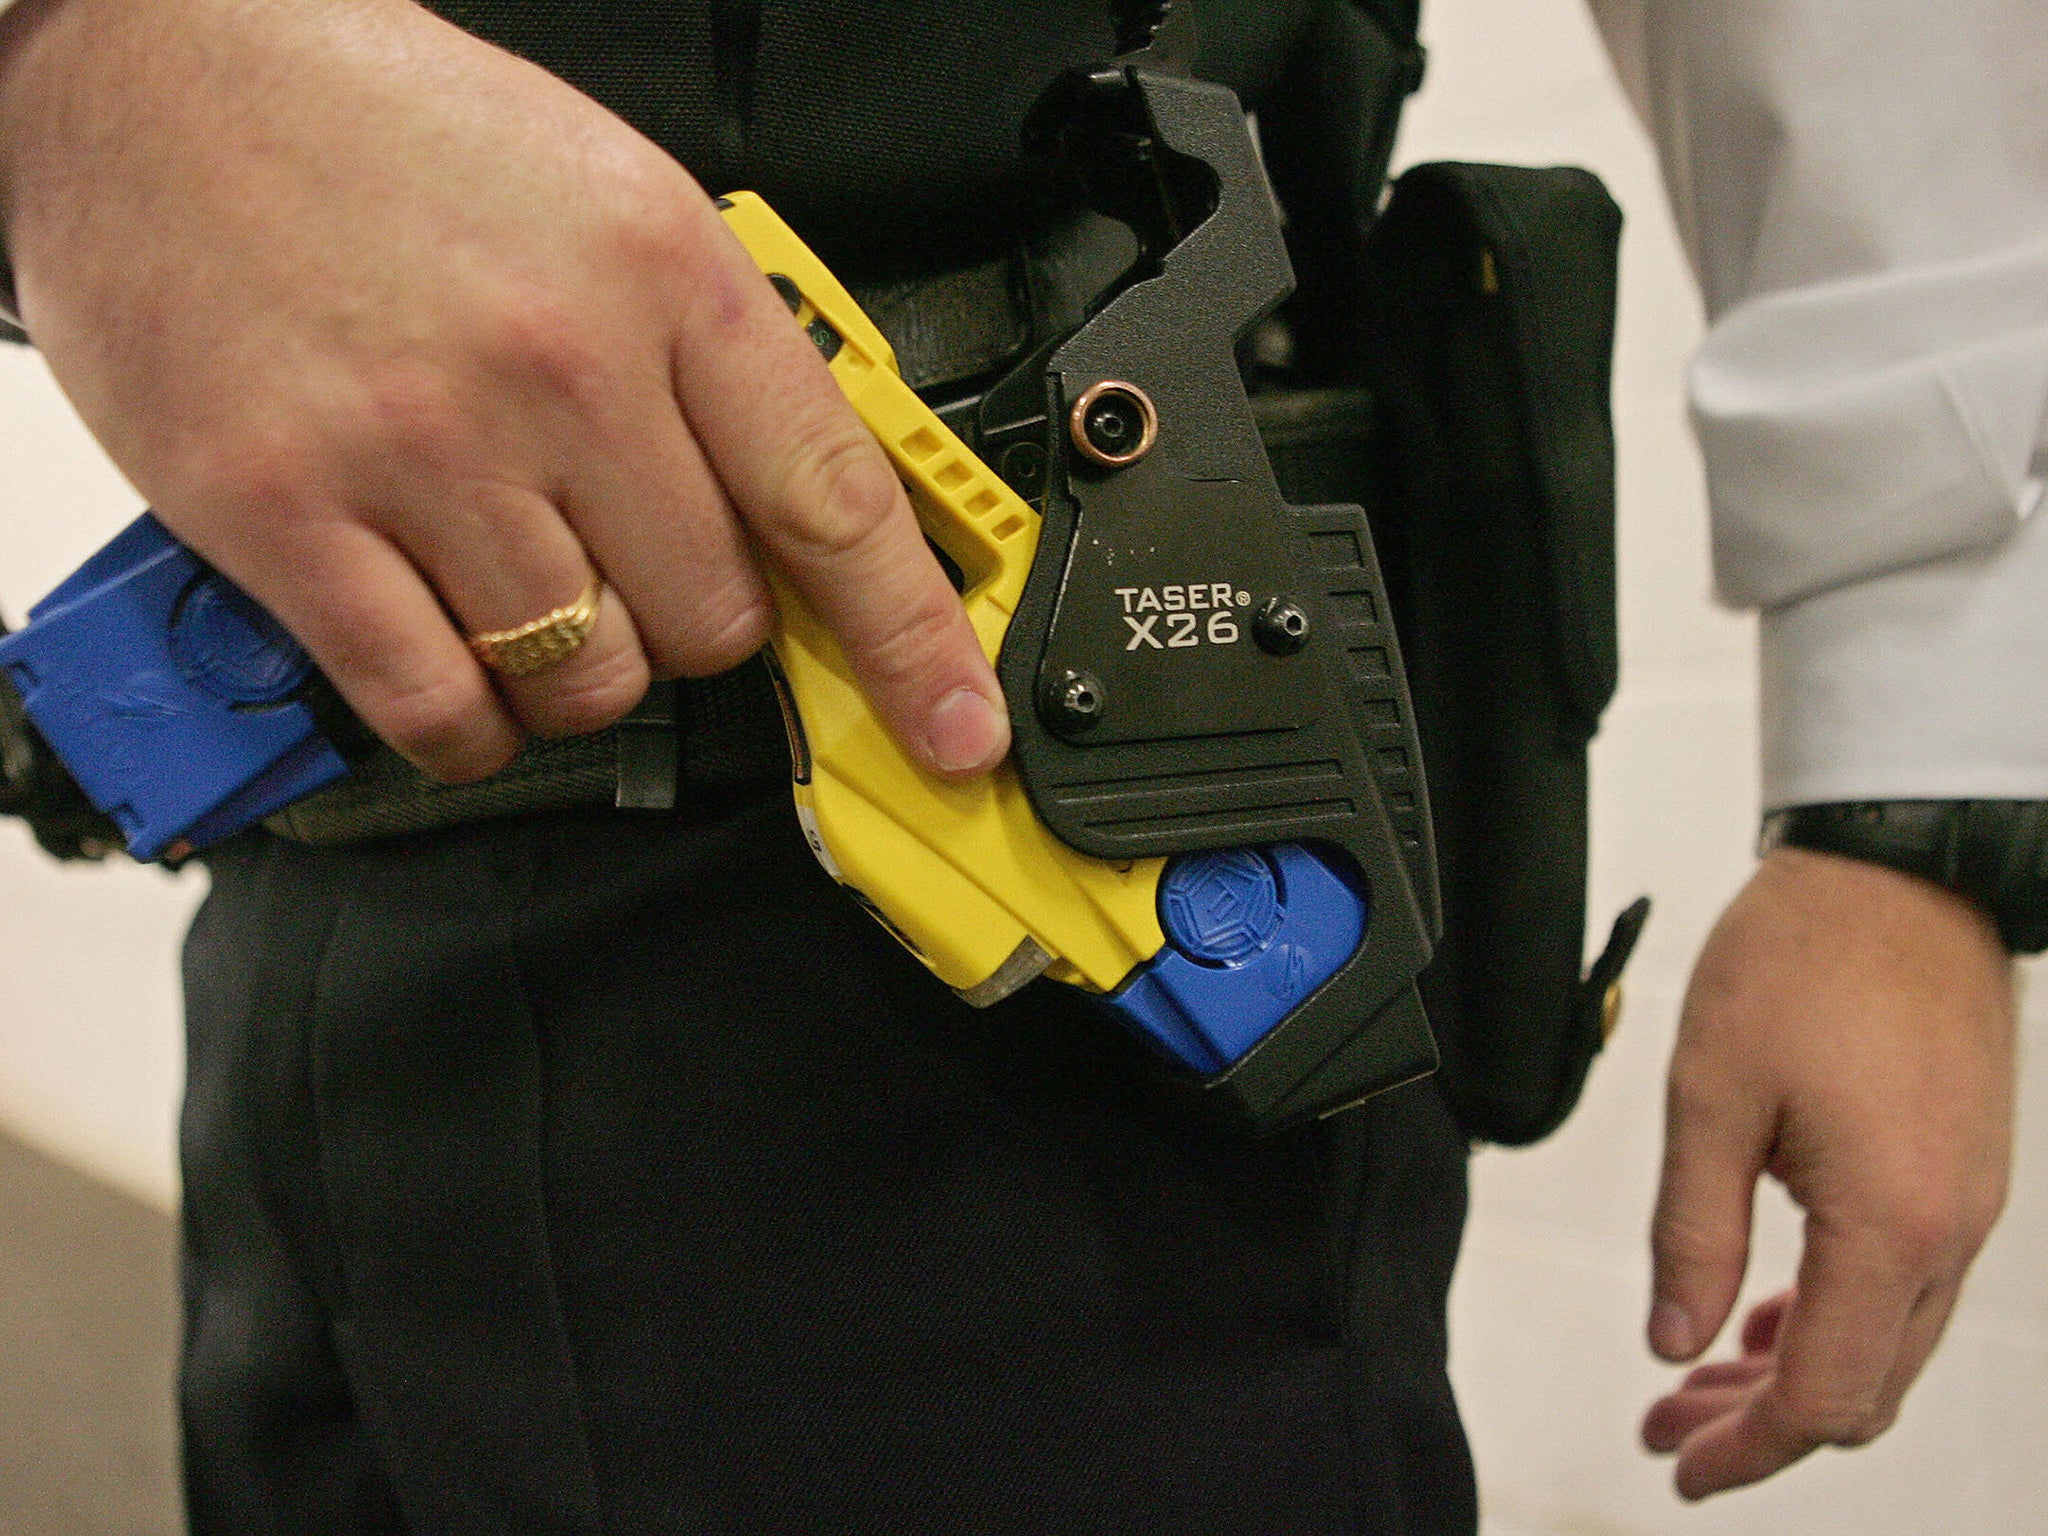 British police started using Tasers in 2003